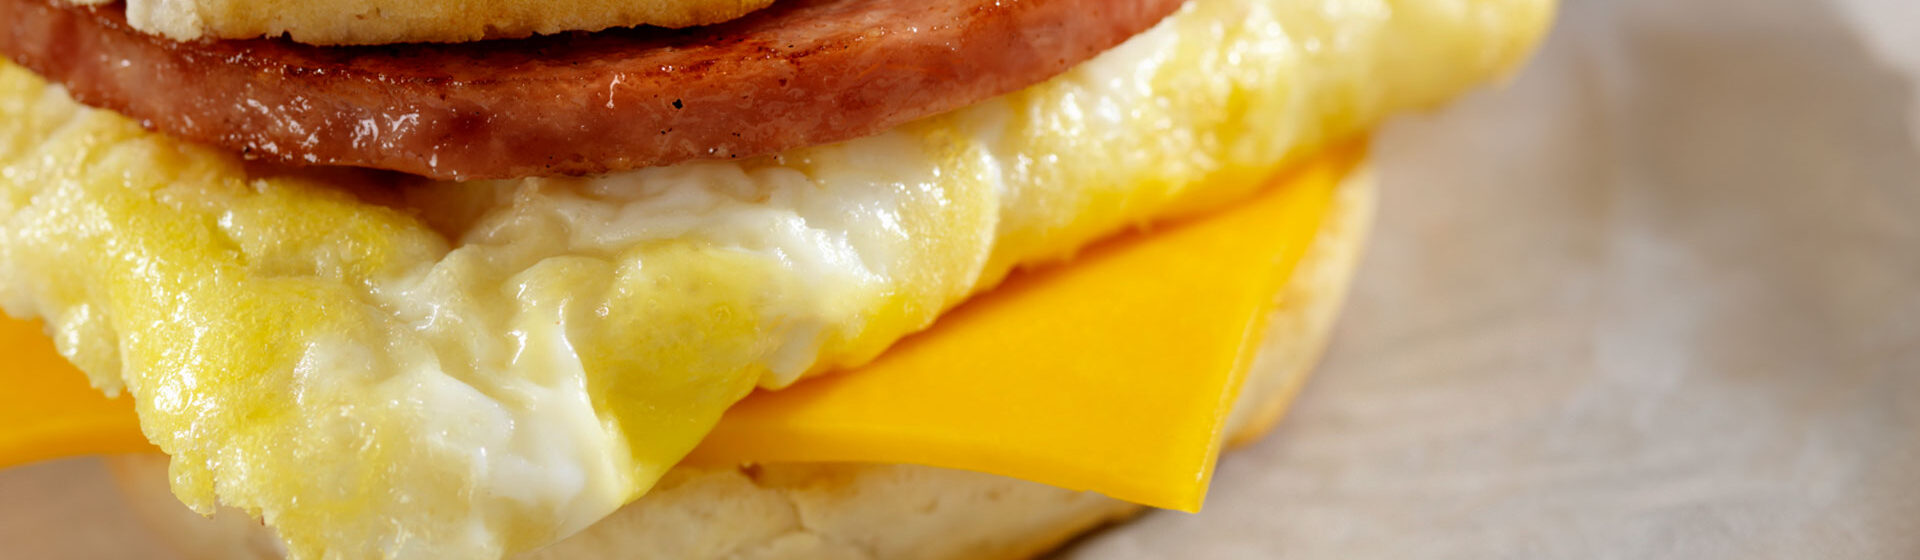 Ham, egg and cheese biscuit sandwich